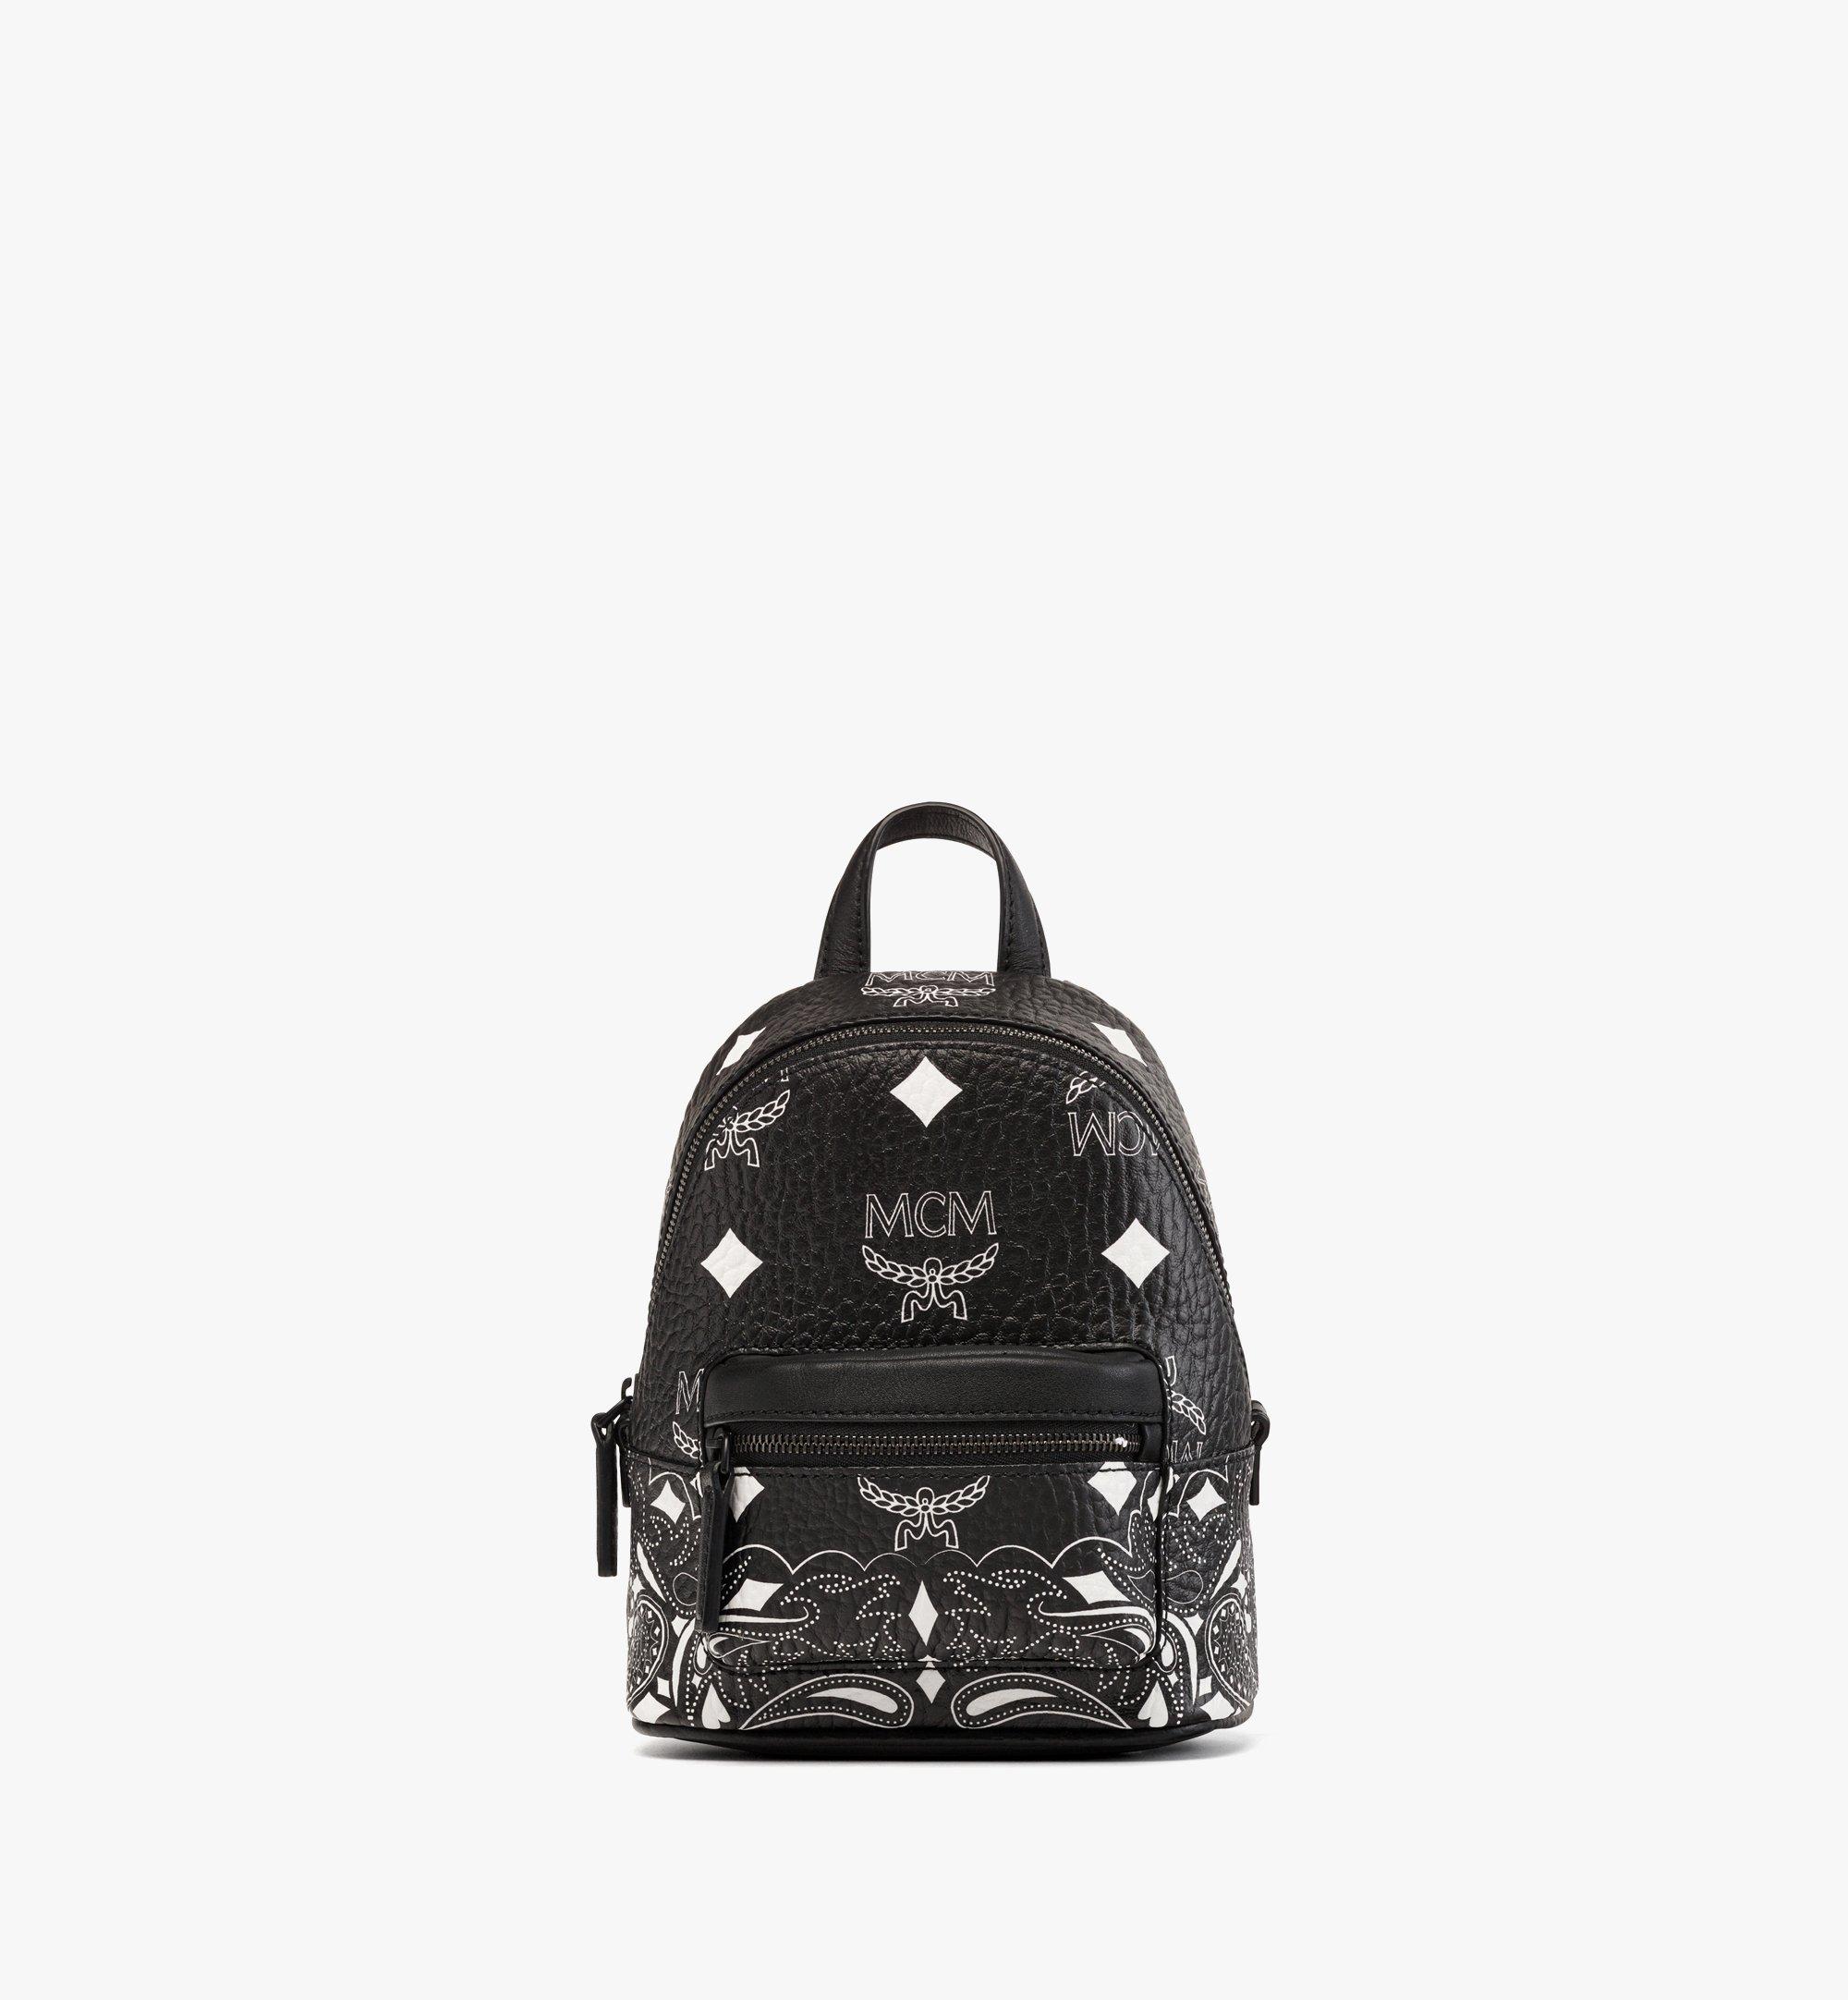 MCM Mini Stark Backpack  Backpack outfit, Teenage fashion outfits